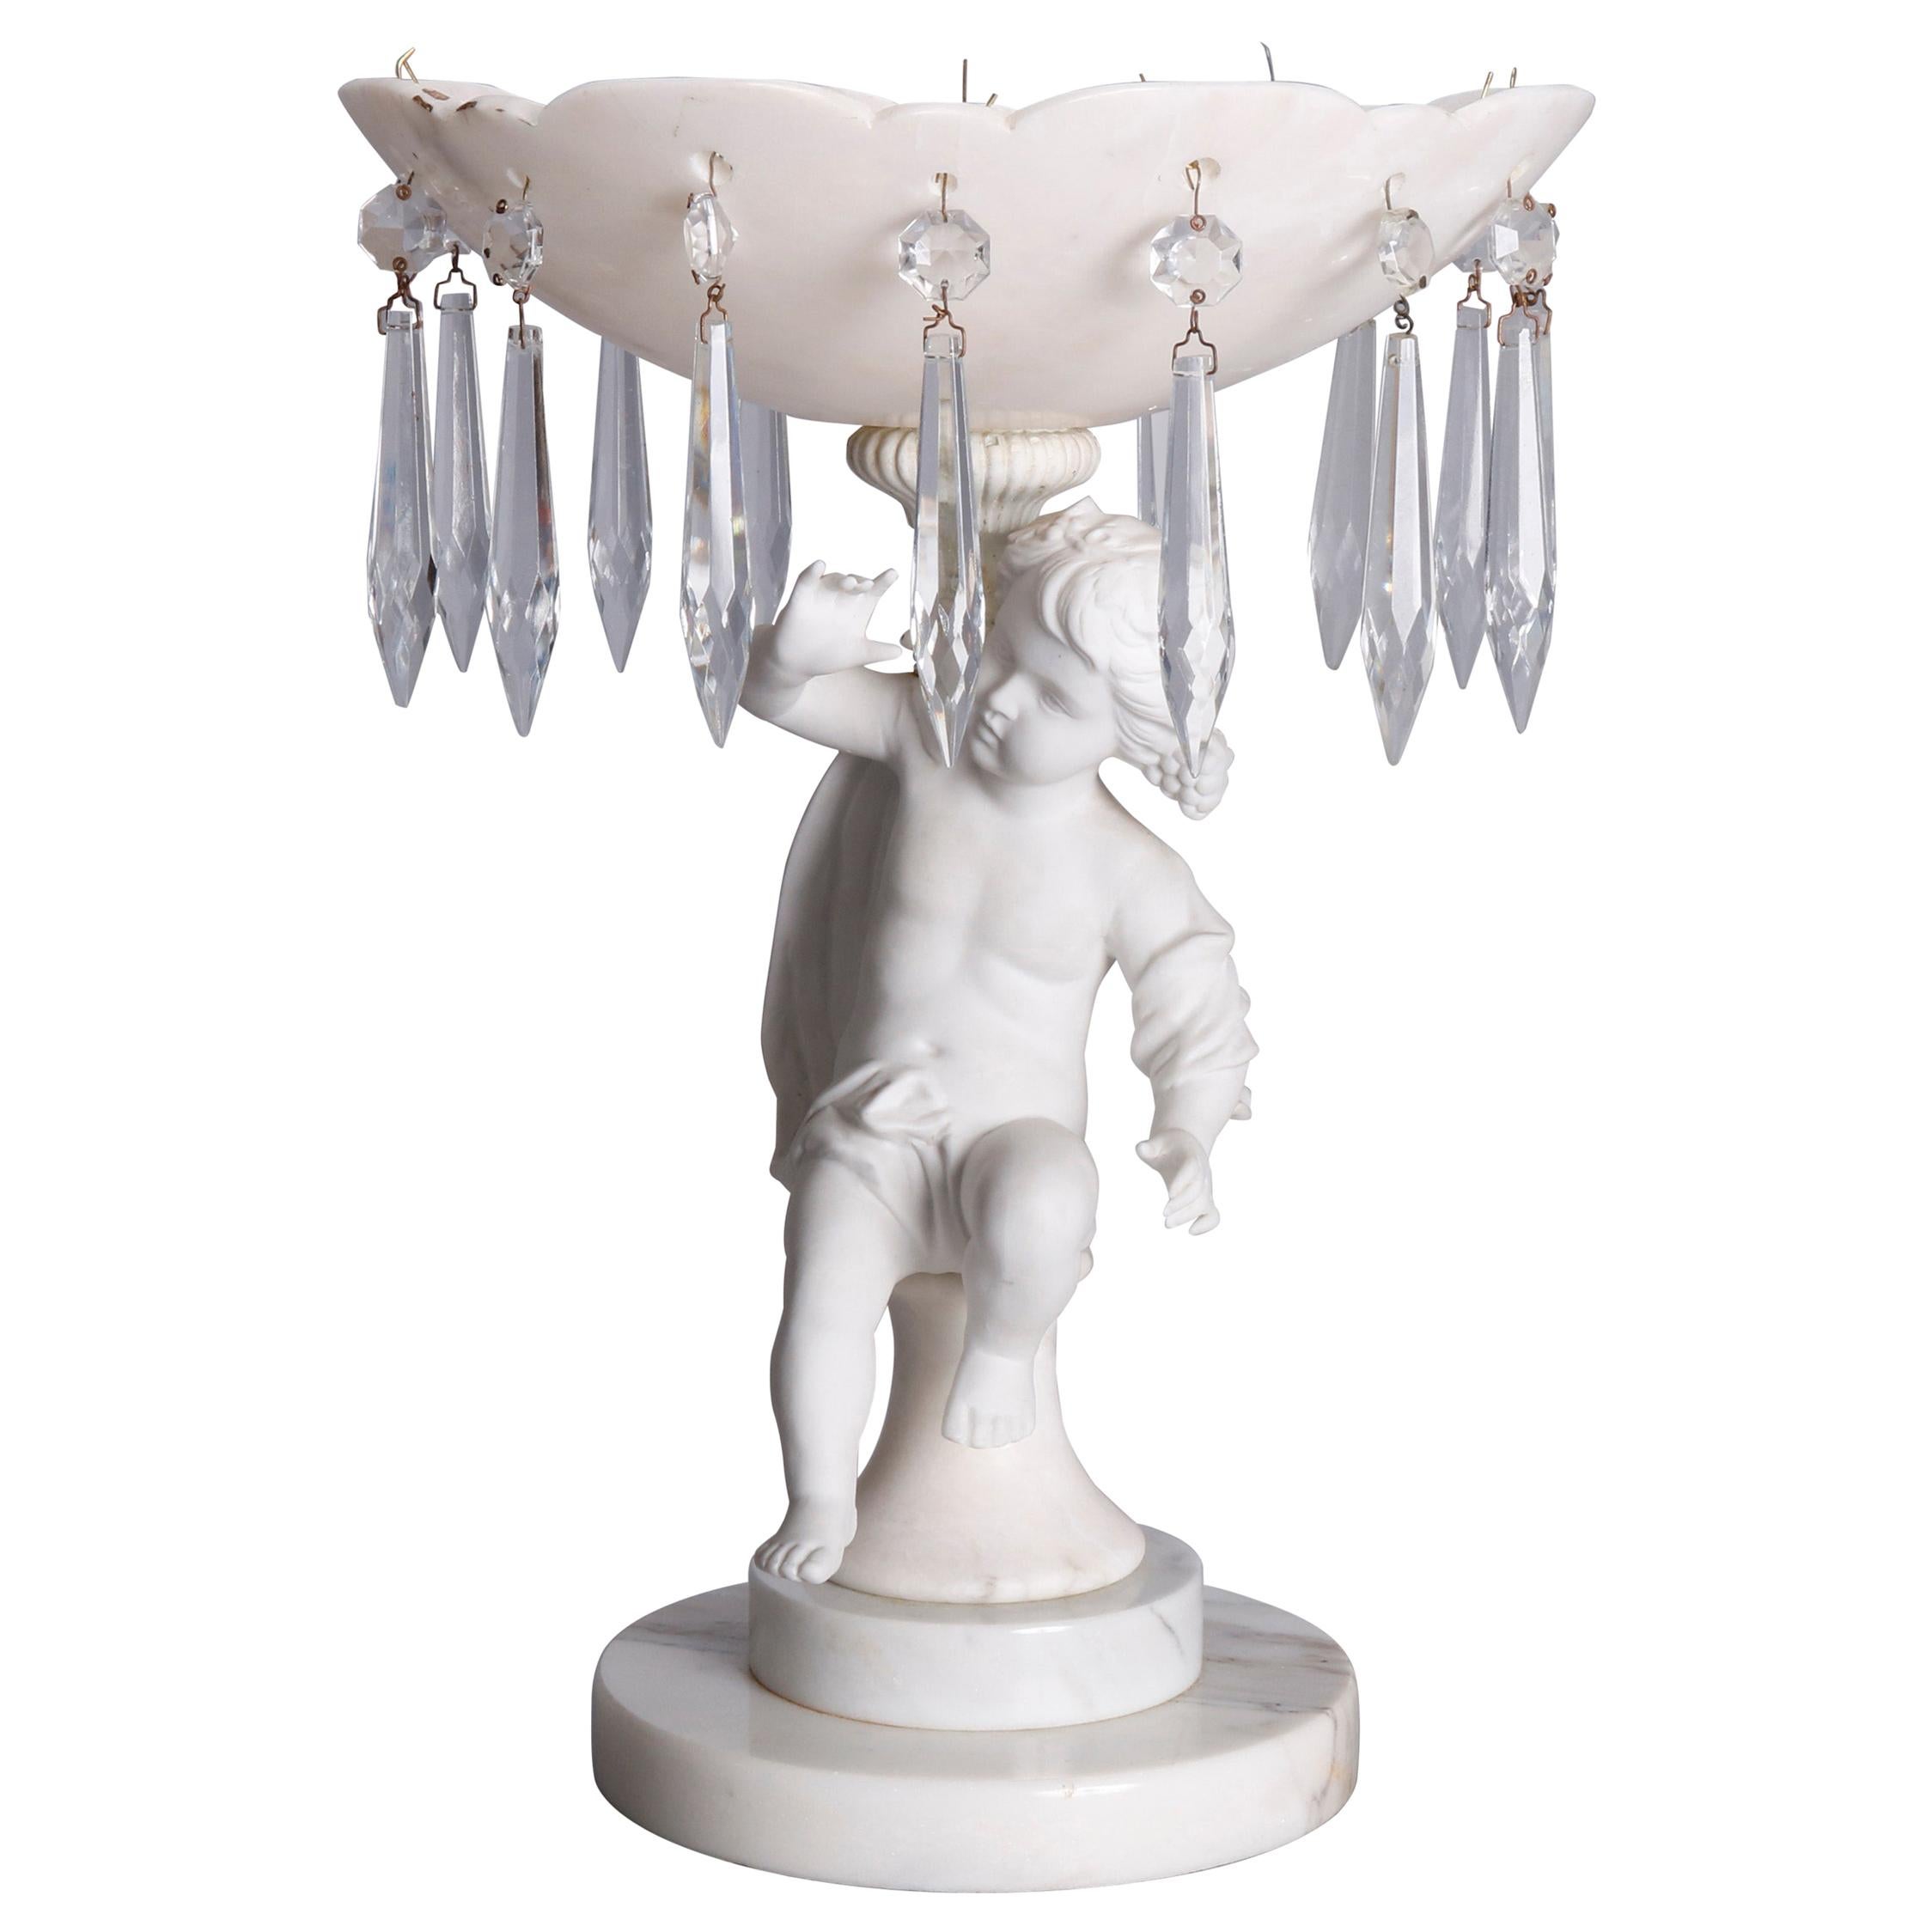 Antique Italian Carved Marble and Crystal Figural Cherub Tazza, 19th Century